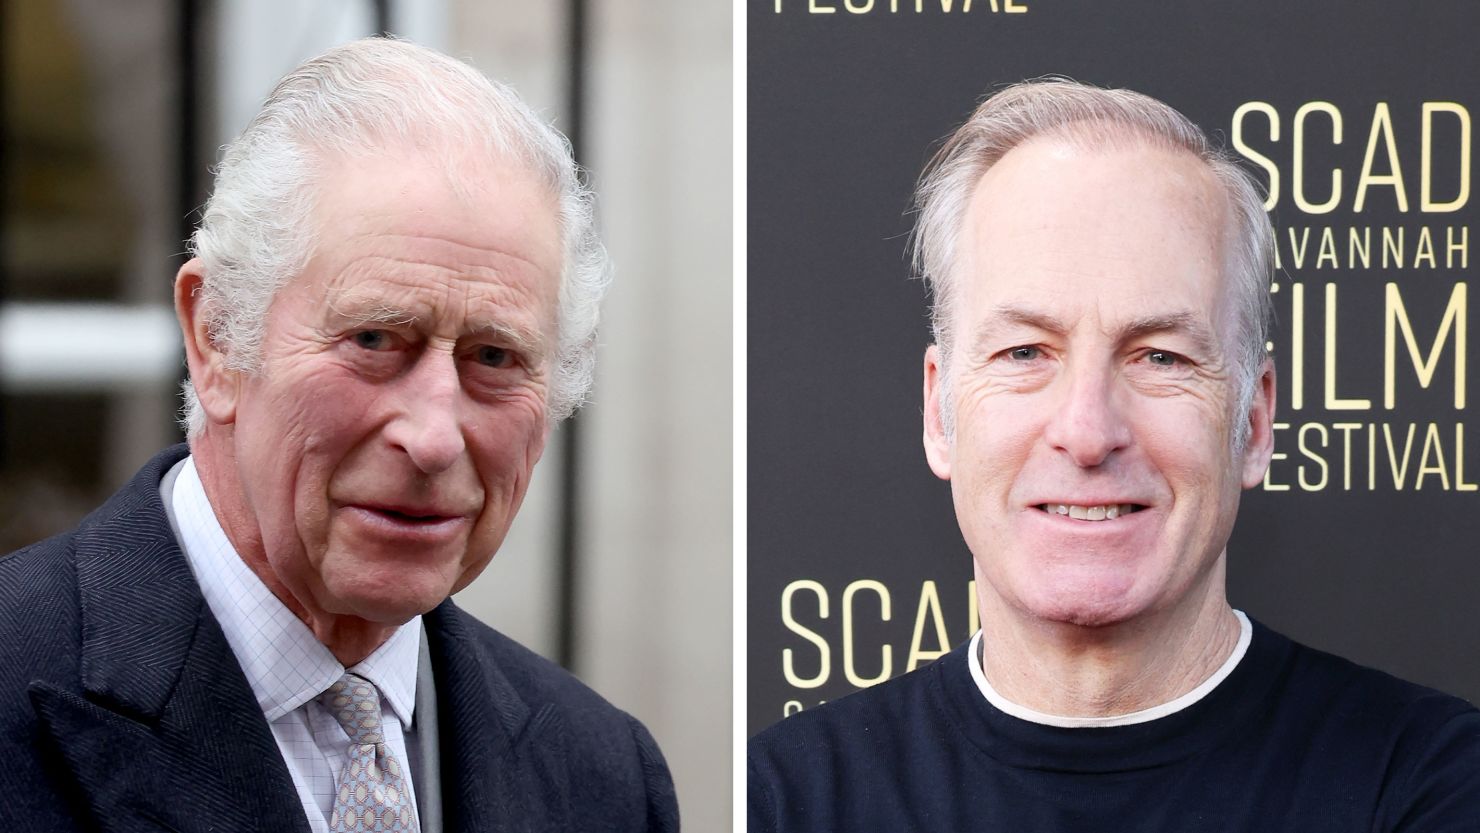 King Charles III and actor Bob Odenkirk.